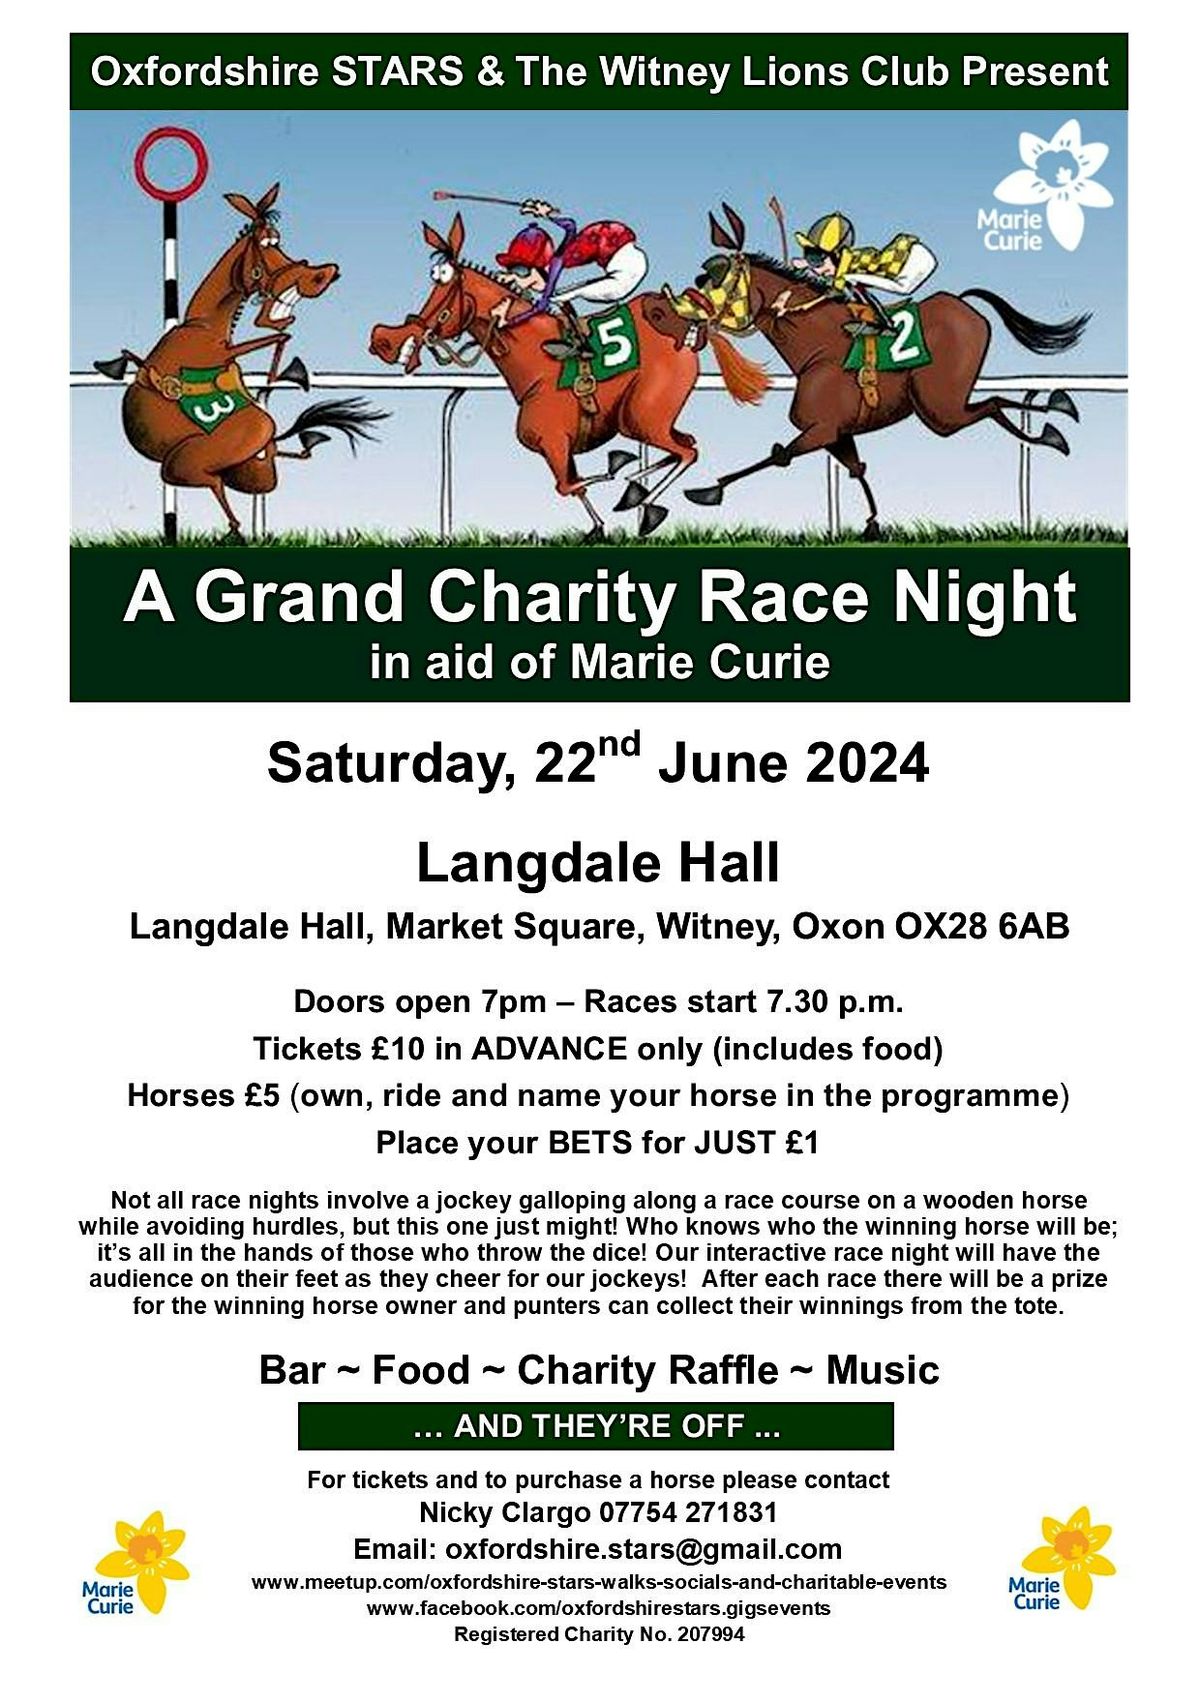 Charity Race Night in aid of Marie Curie, 22nd June 2024